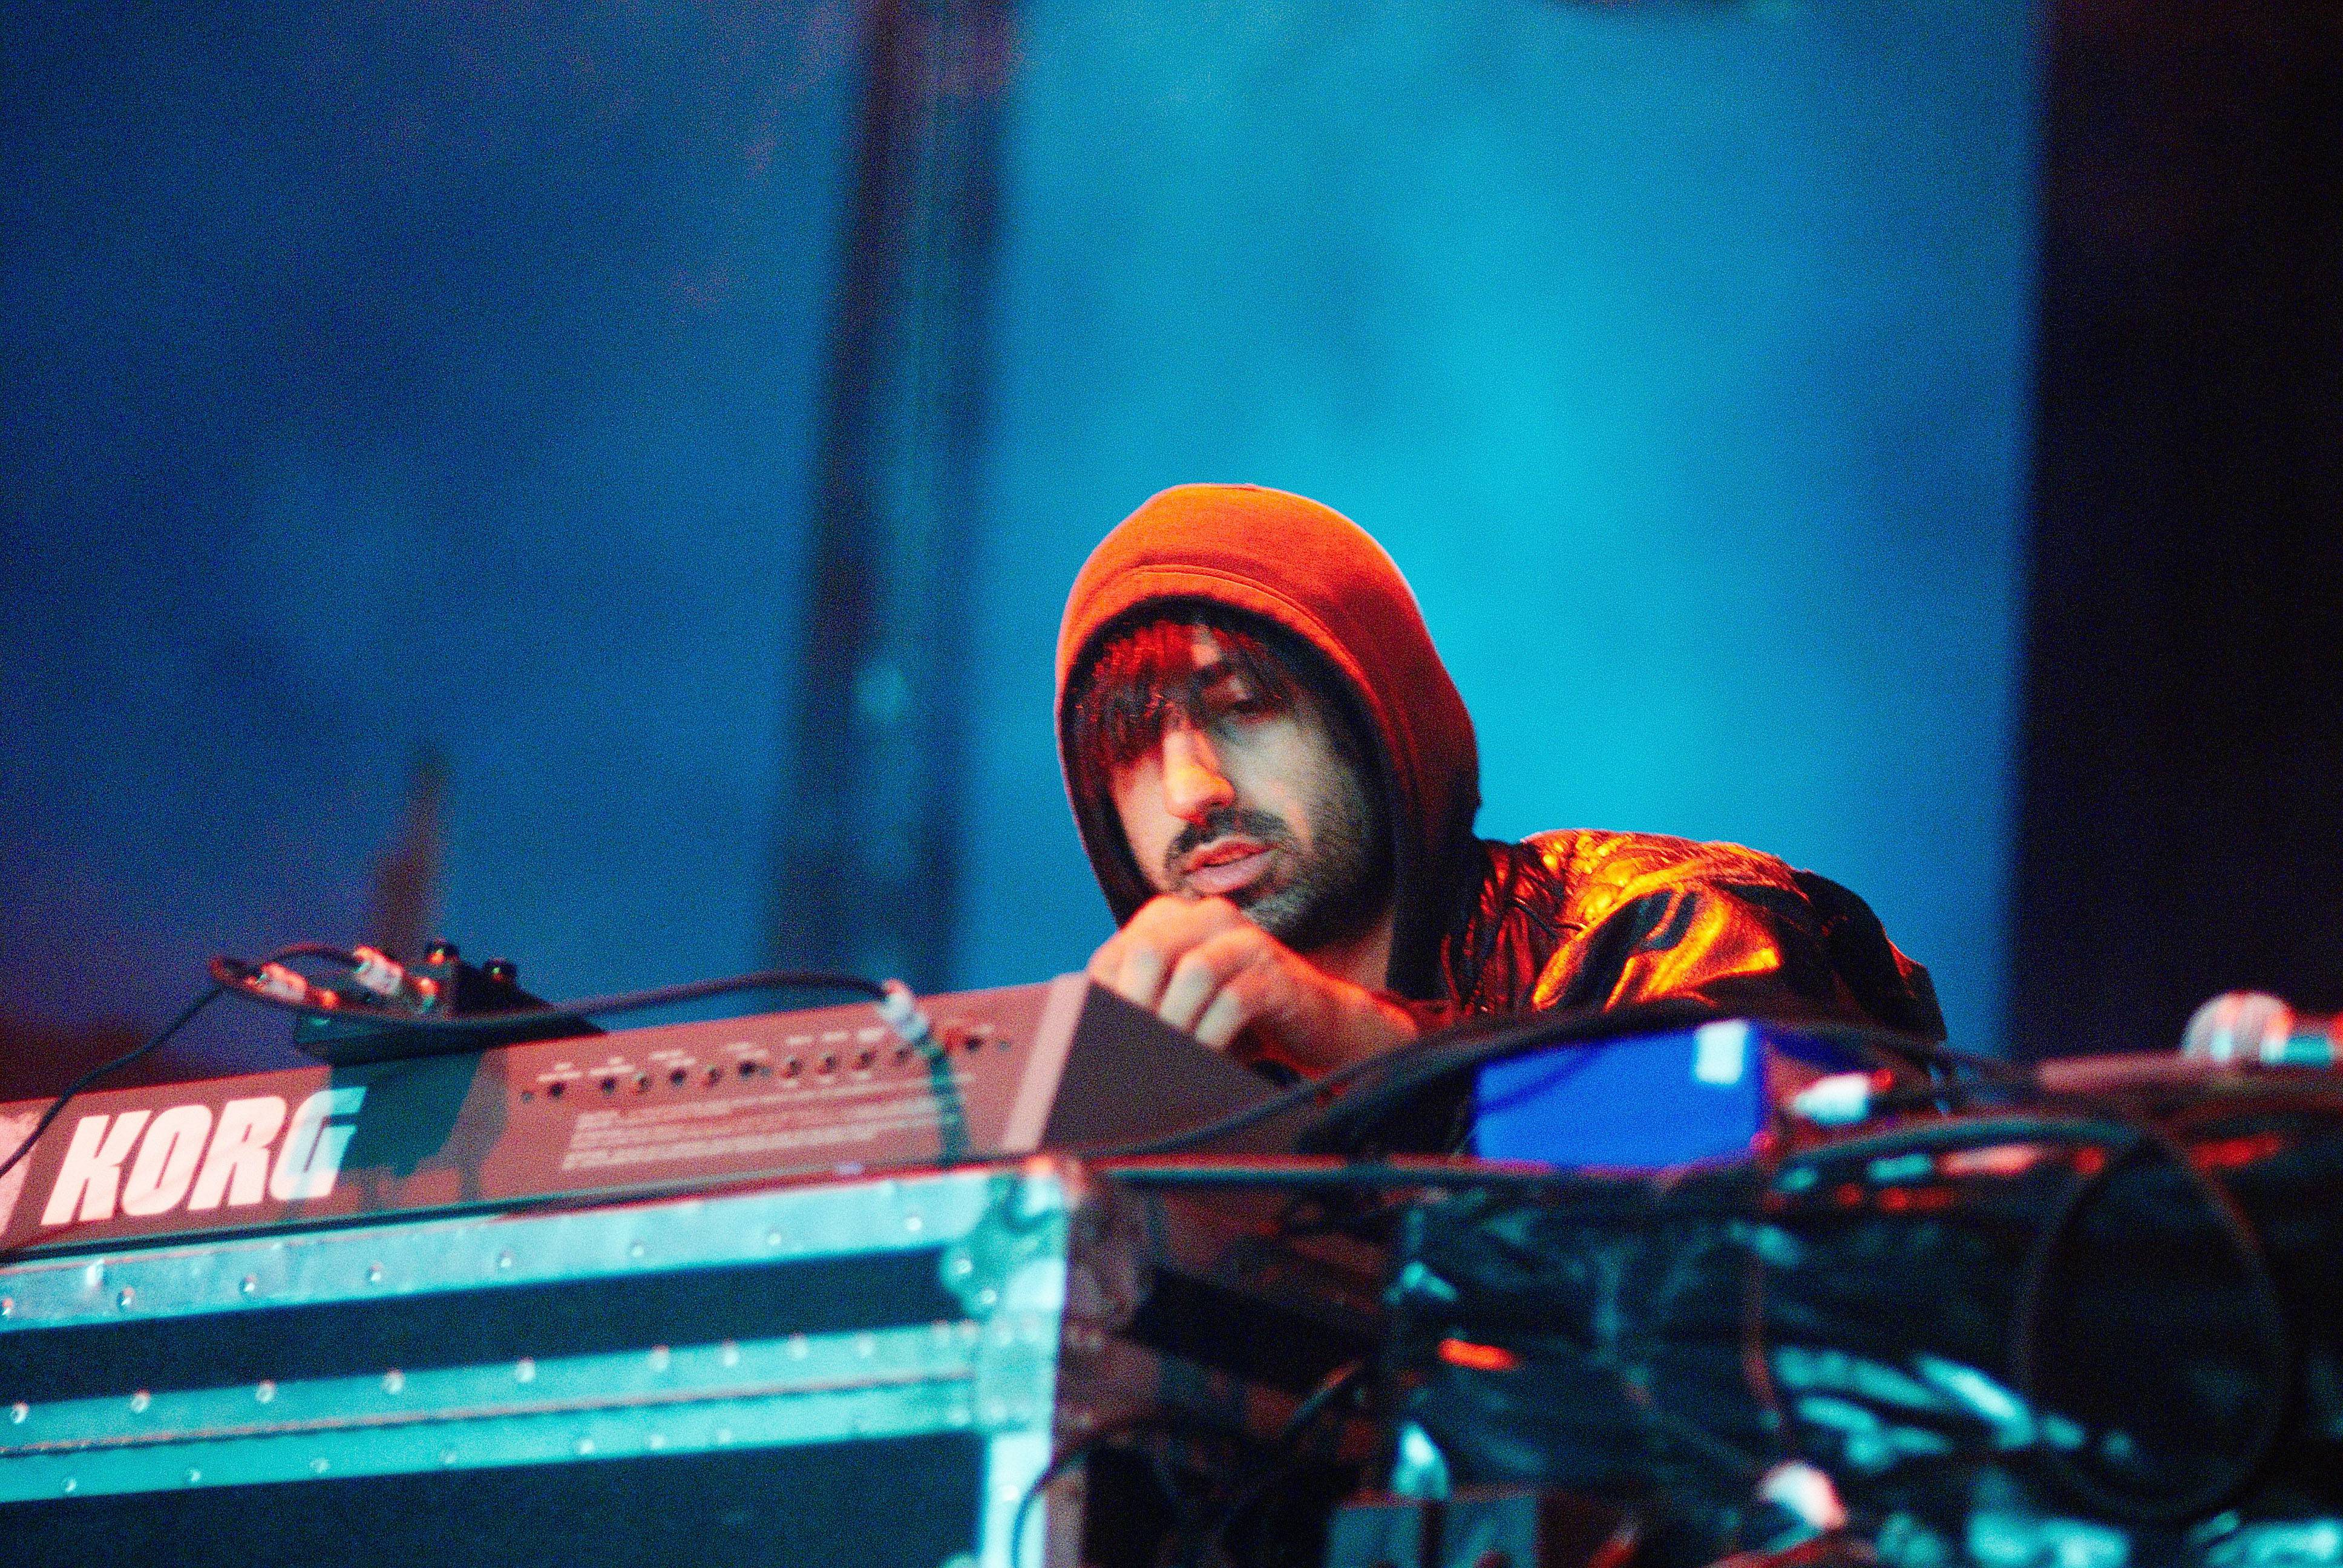 Ethan Kath performing on stage in 2008. (Gary Wolstenholme—Redferns)